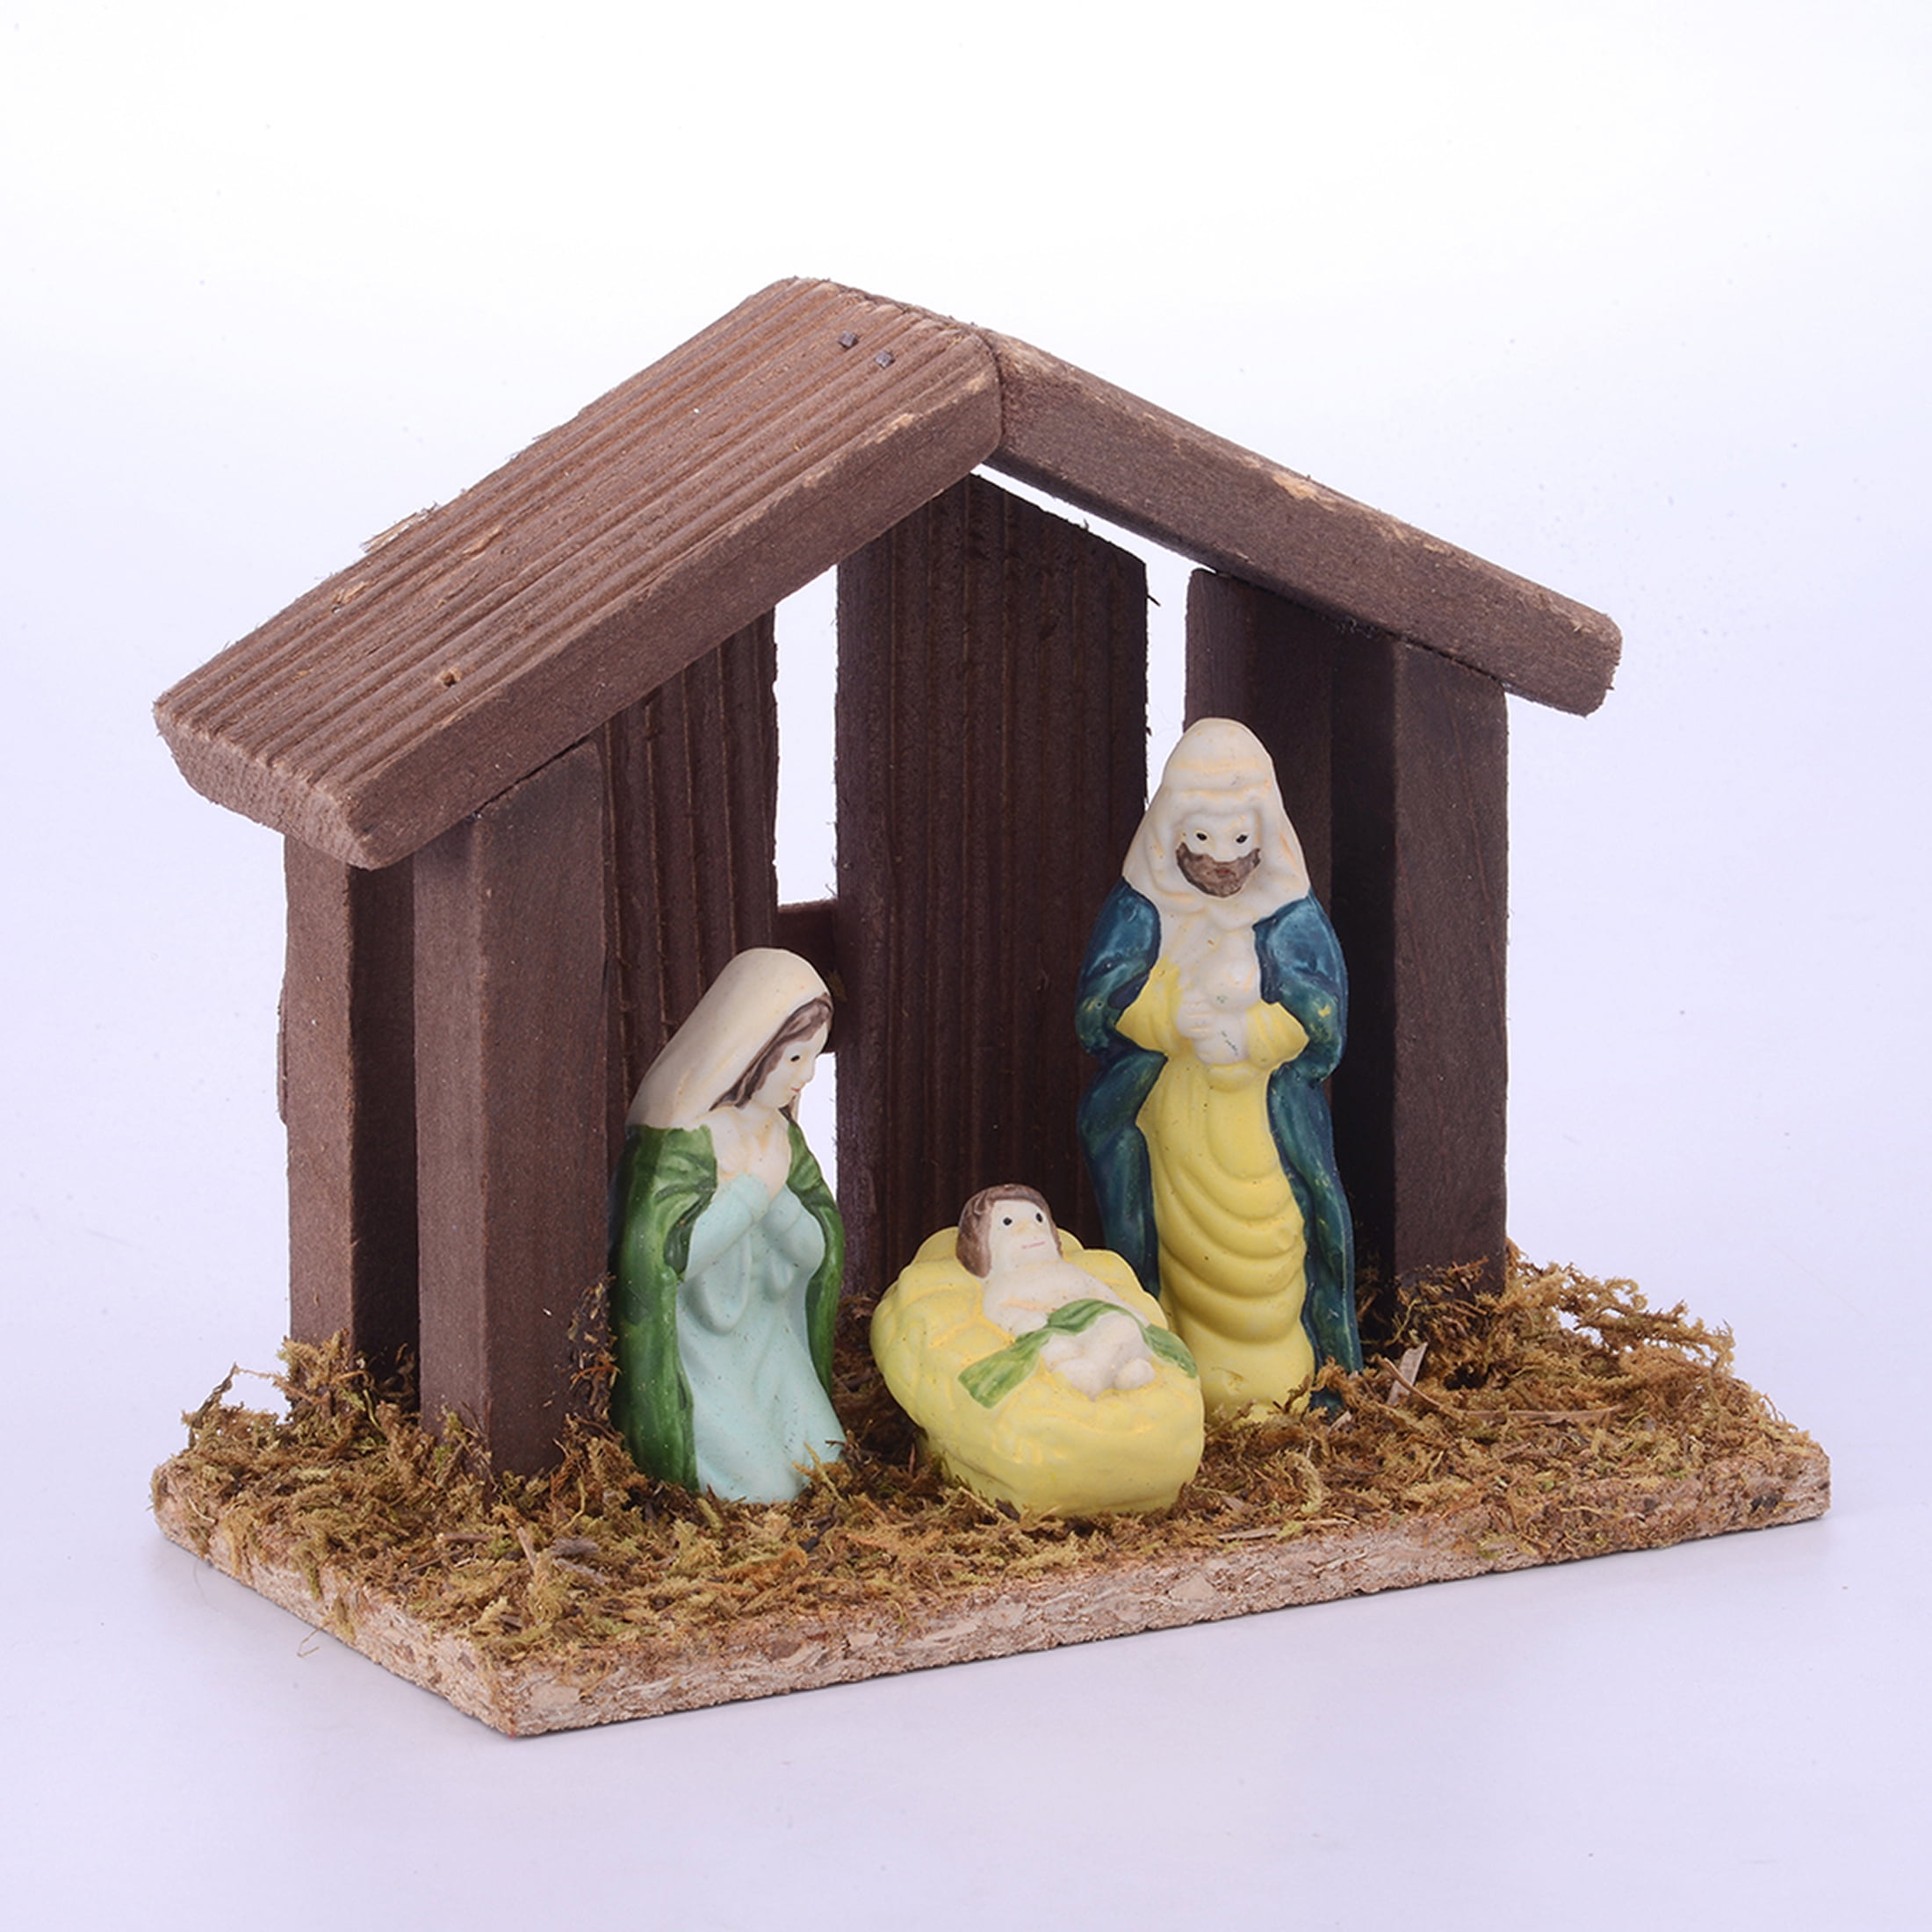 Holiday Time 4-Piece Porcelain Nativity Scene with Wooden Stable